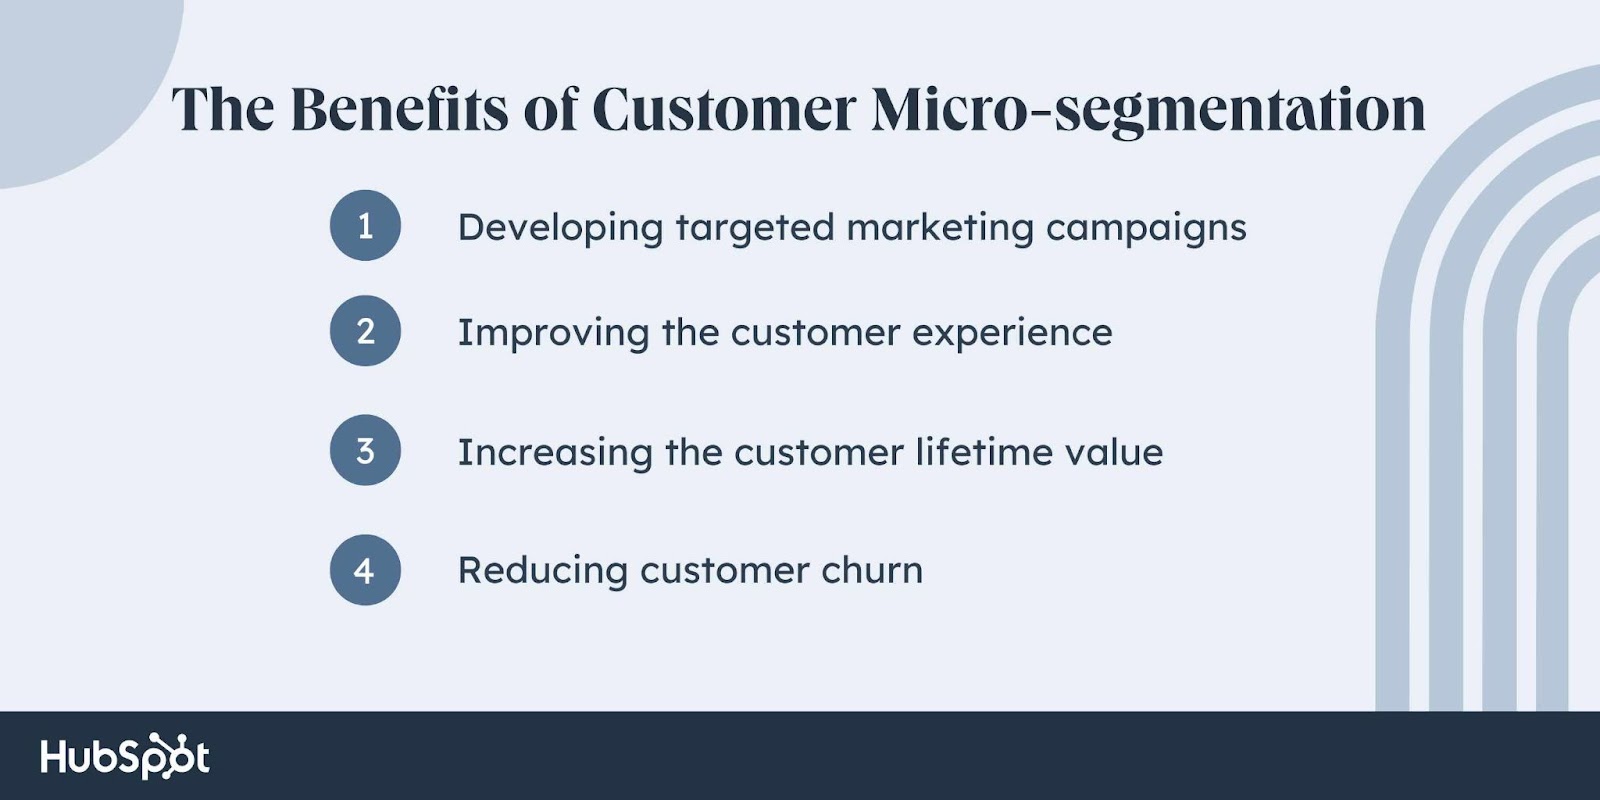 customer micro-segmentation benefits, developing targeted marketing campaigns, improving the customer experience, increasing the customer lifetime value, reducing churn